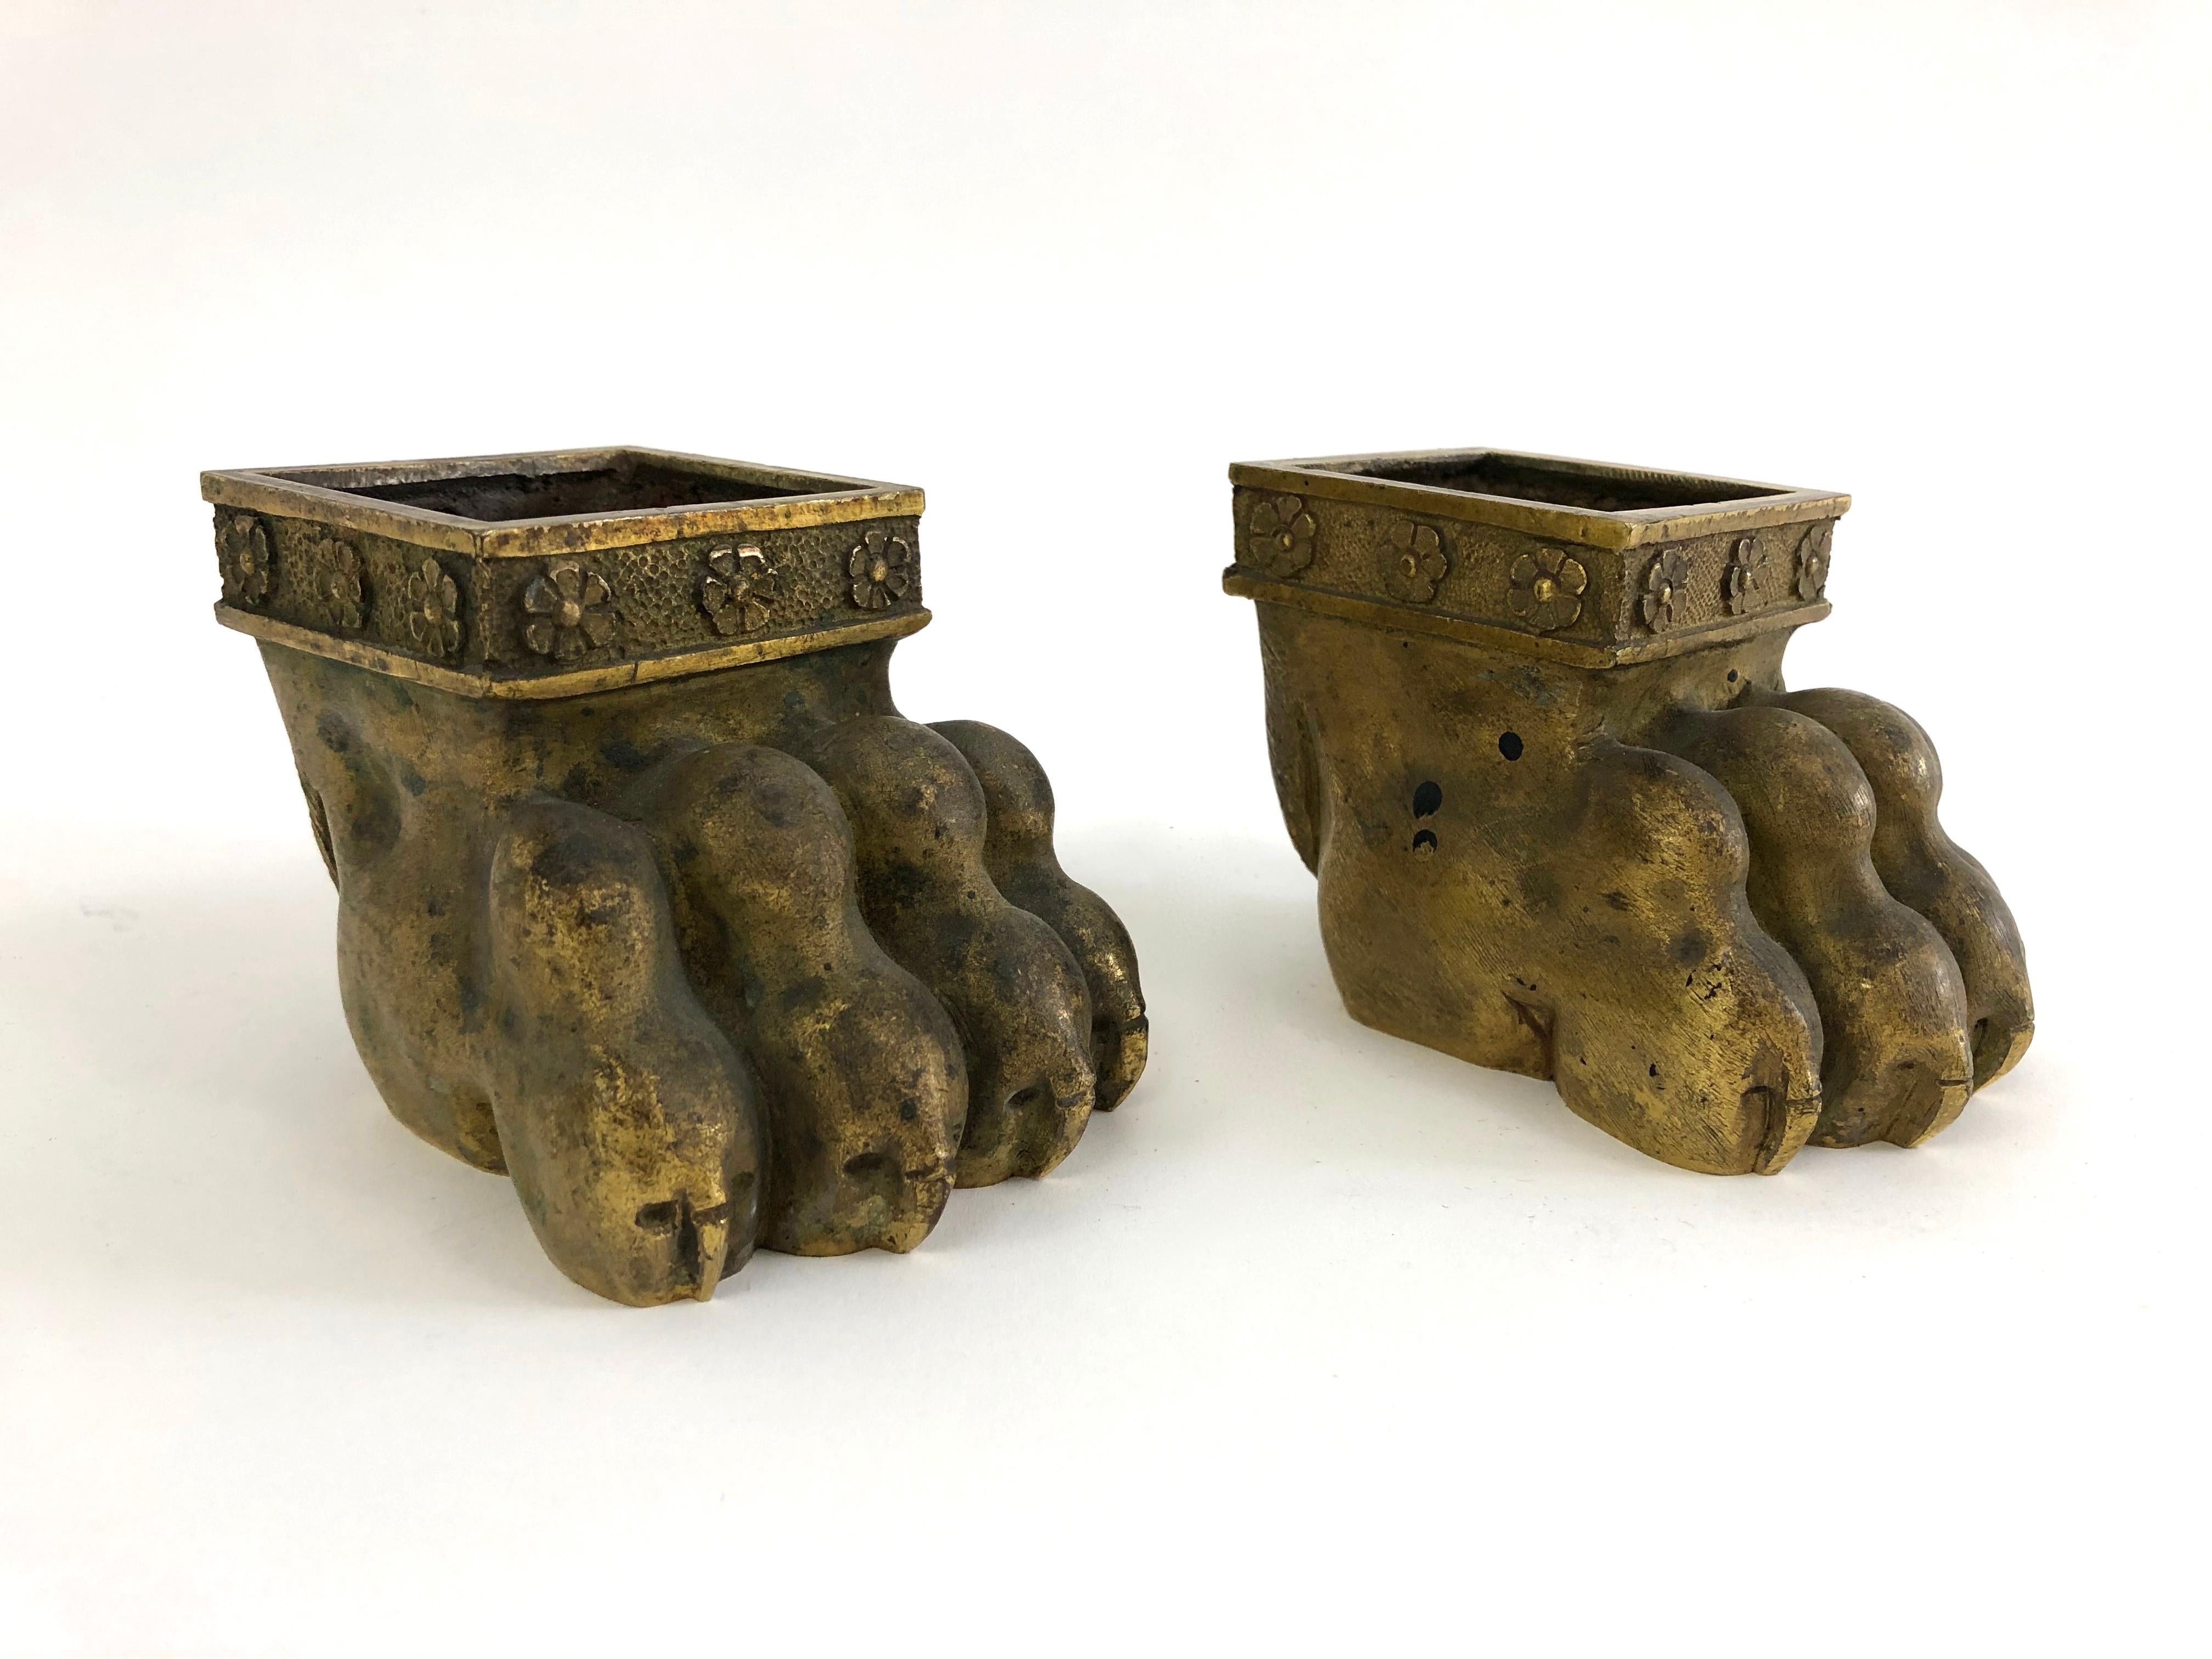 A highly decorative pair of 19th century neoclassical gilt bronze lion paw feet, made for Regency period table, chair or side cabinet. Each is boldly and naturalistically modeled and has a band of rosettes around the top. These unusual objects make